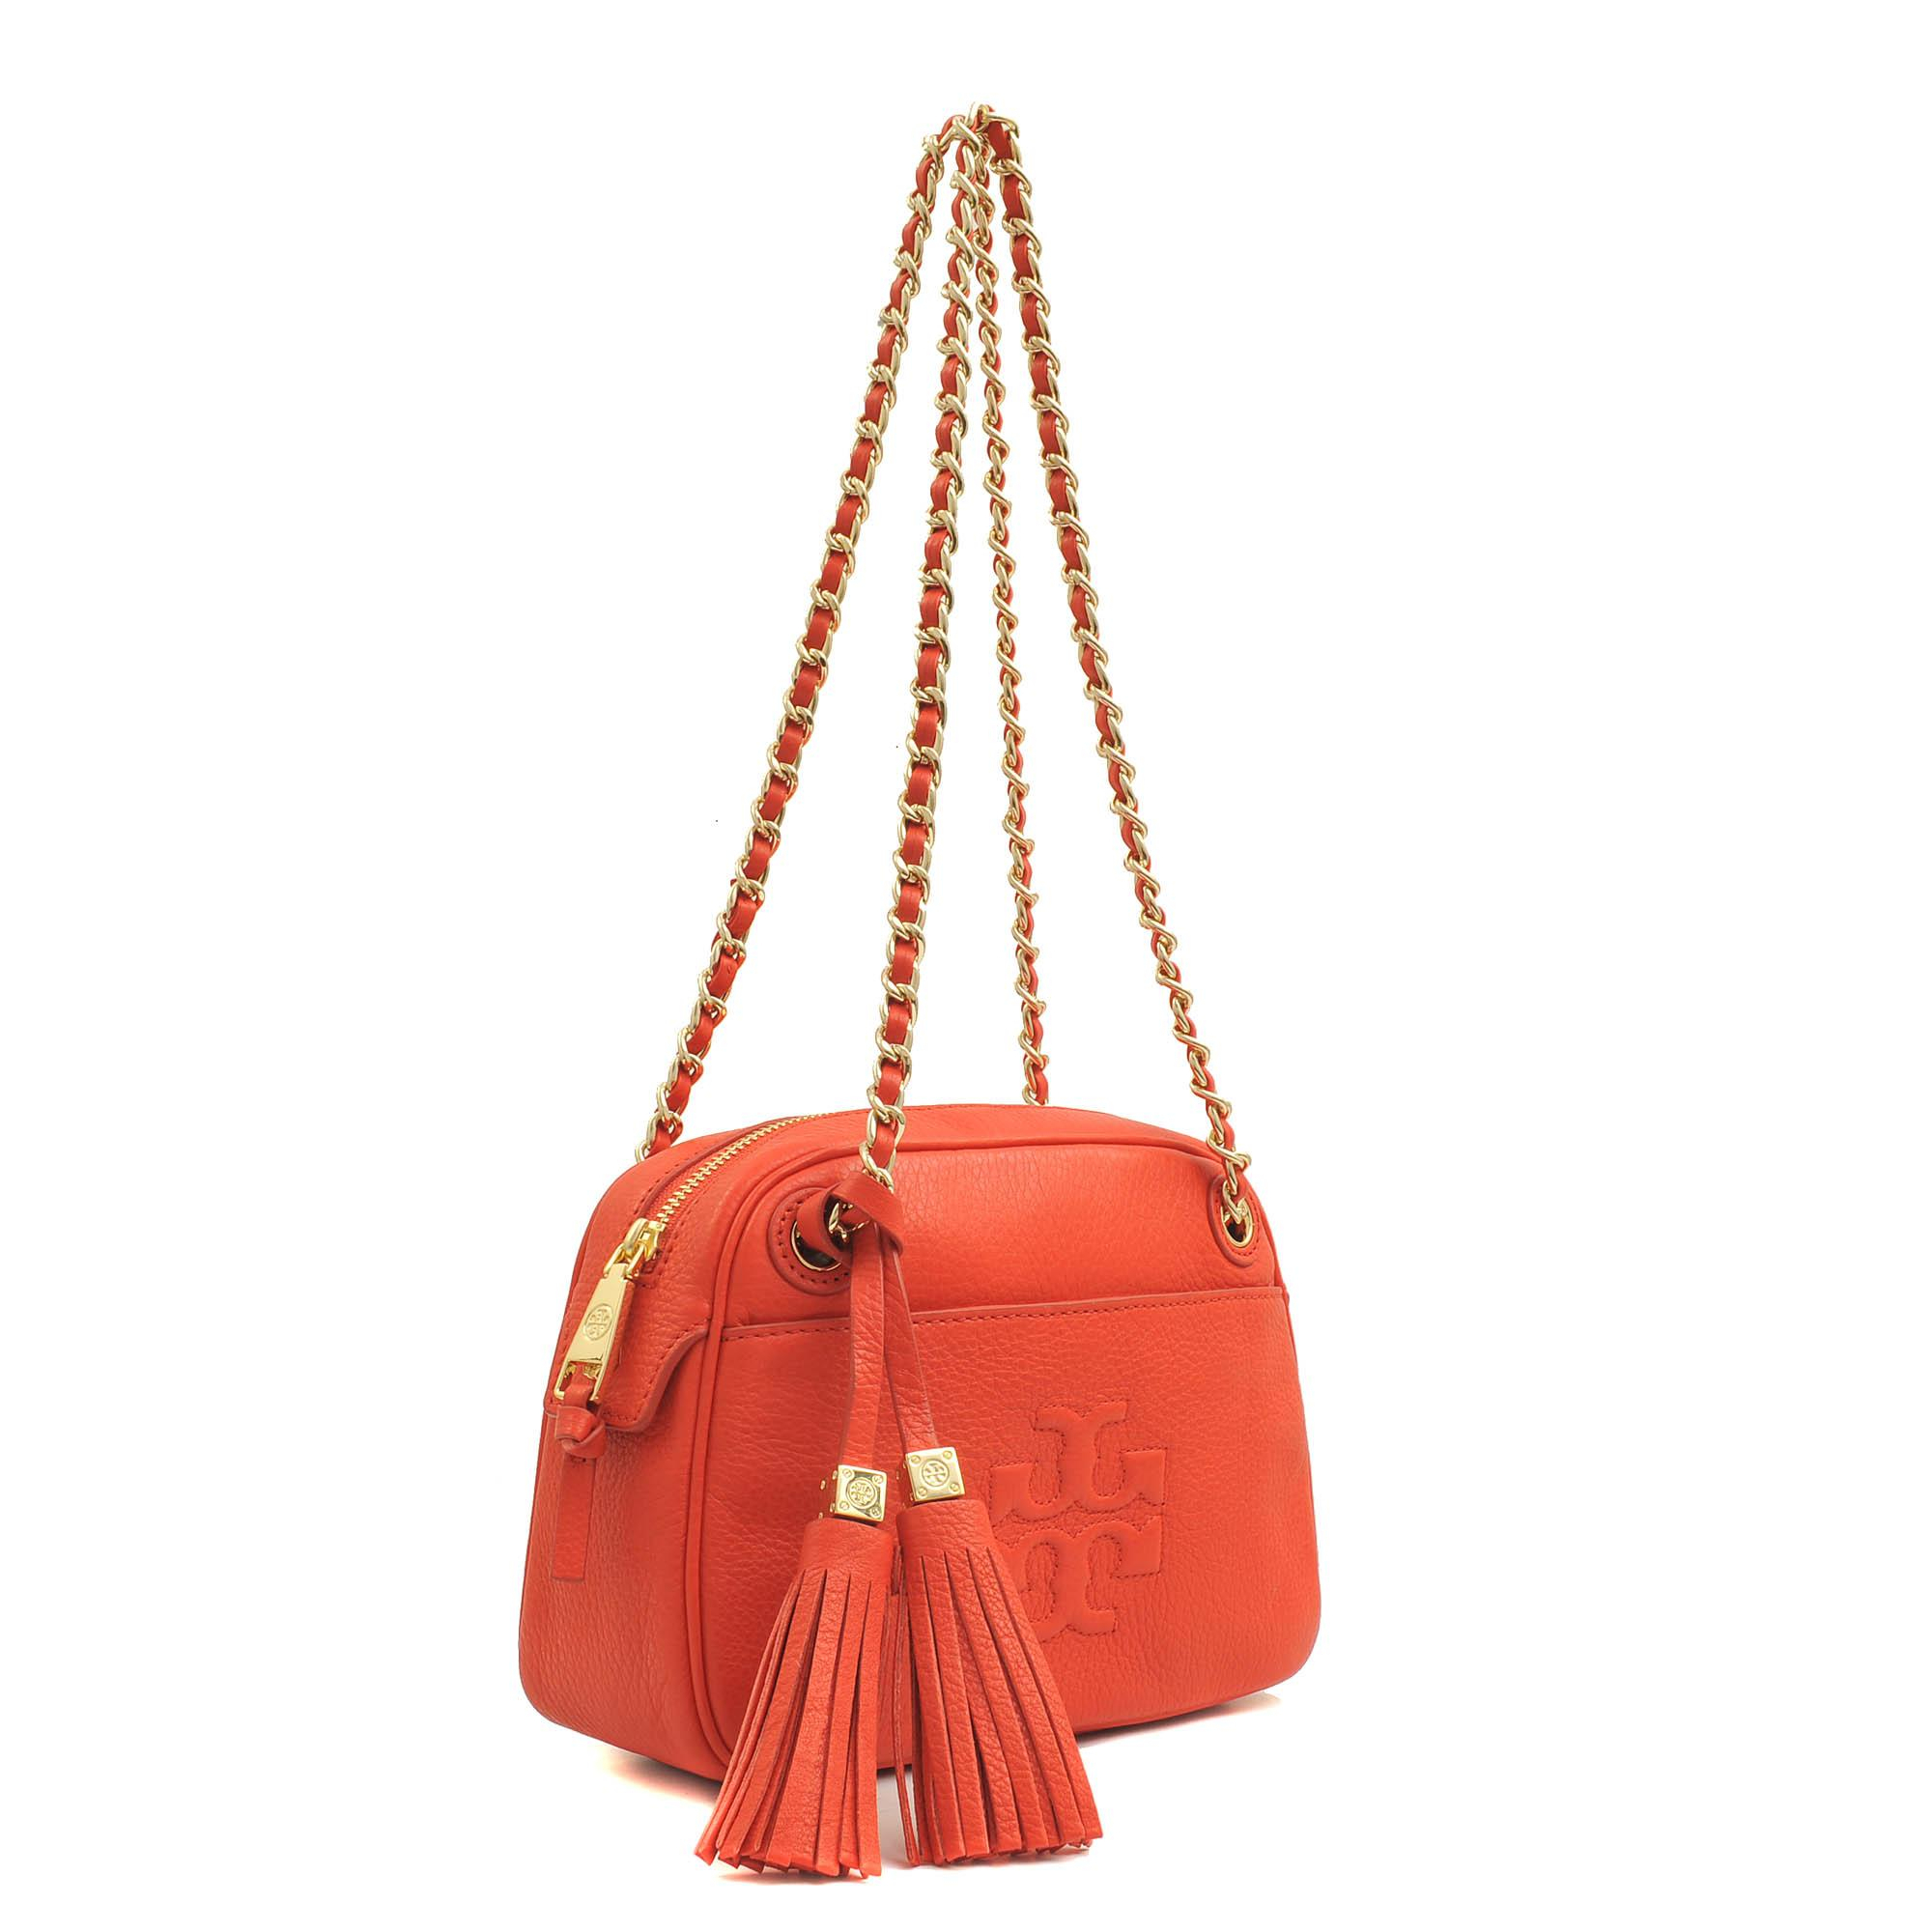 Tory Burch Thea Crossbody Chain Bag in Red | Lyst